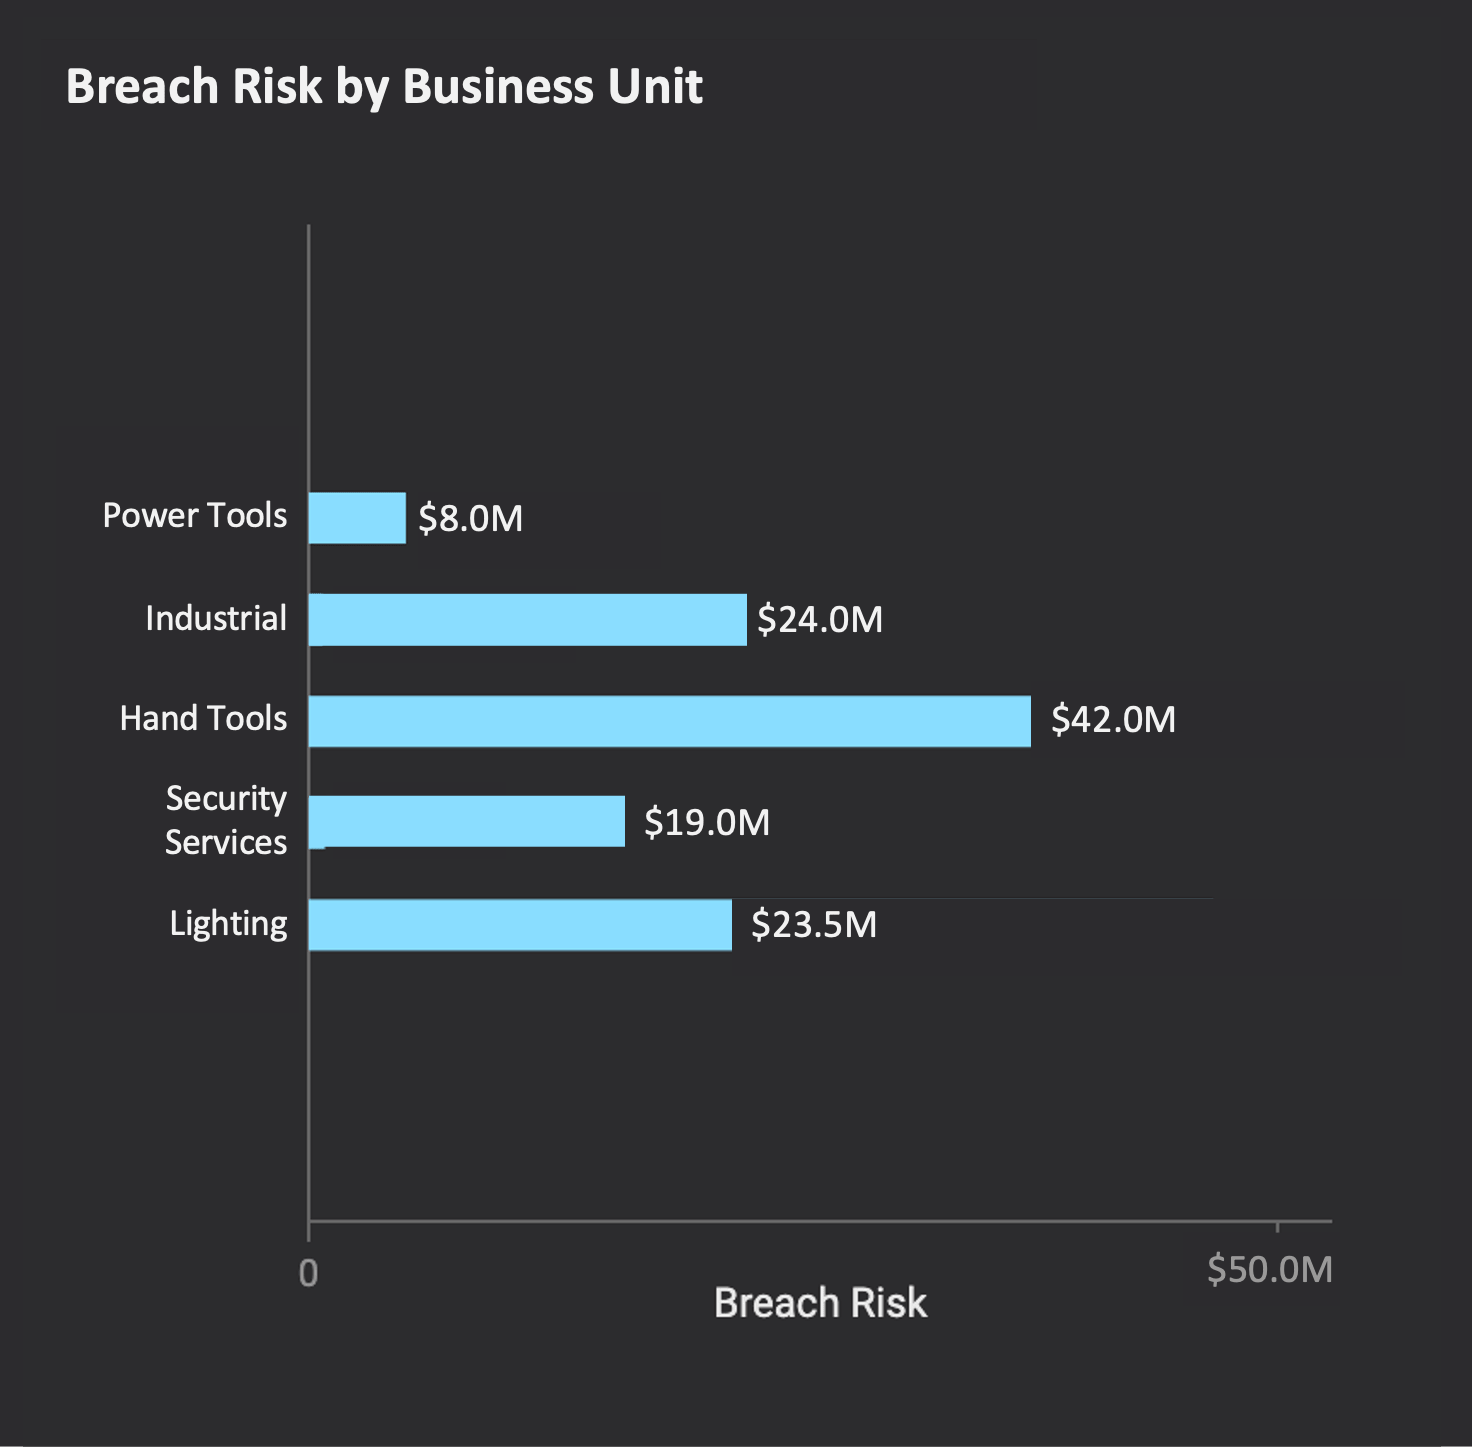 Breach Risk by Business Unit